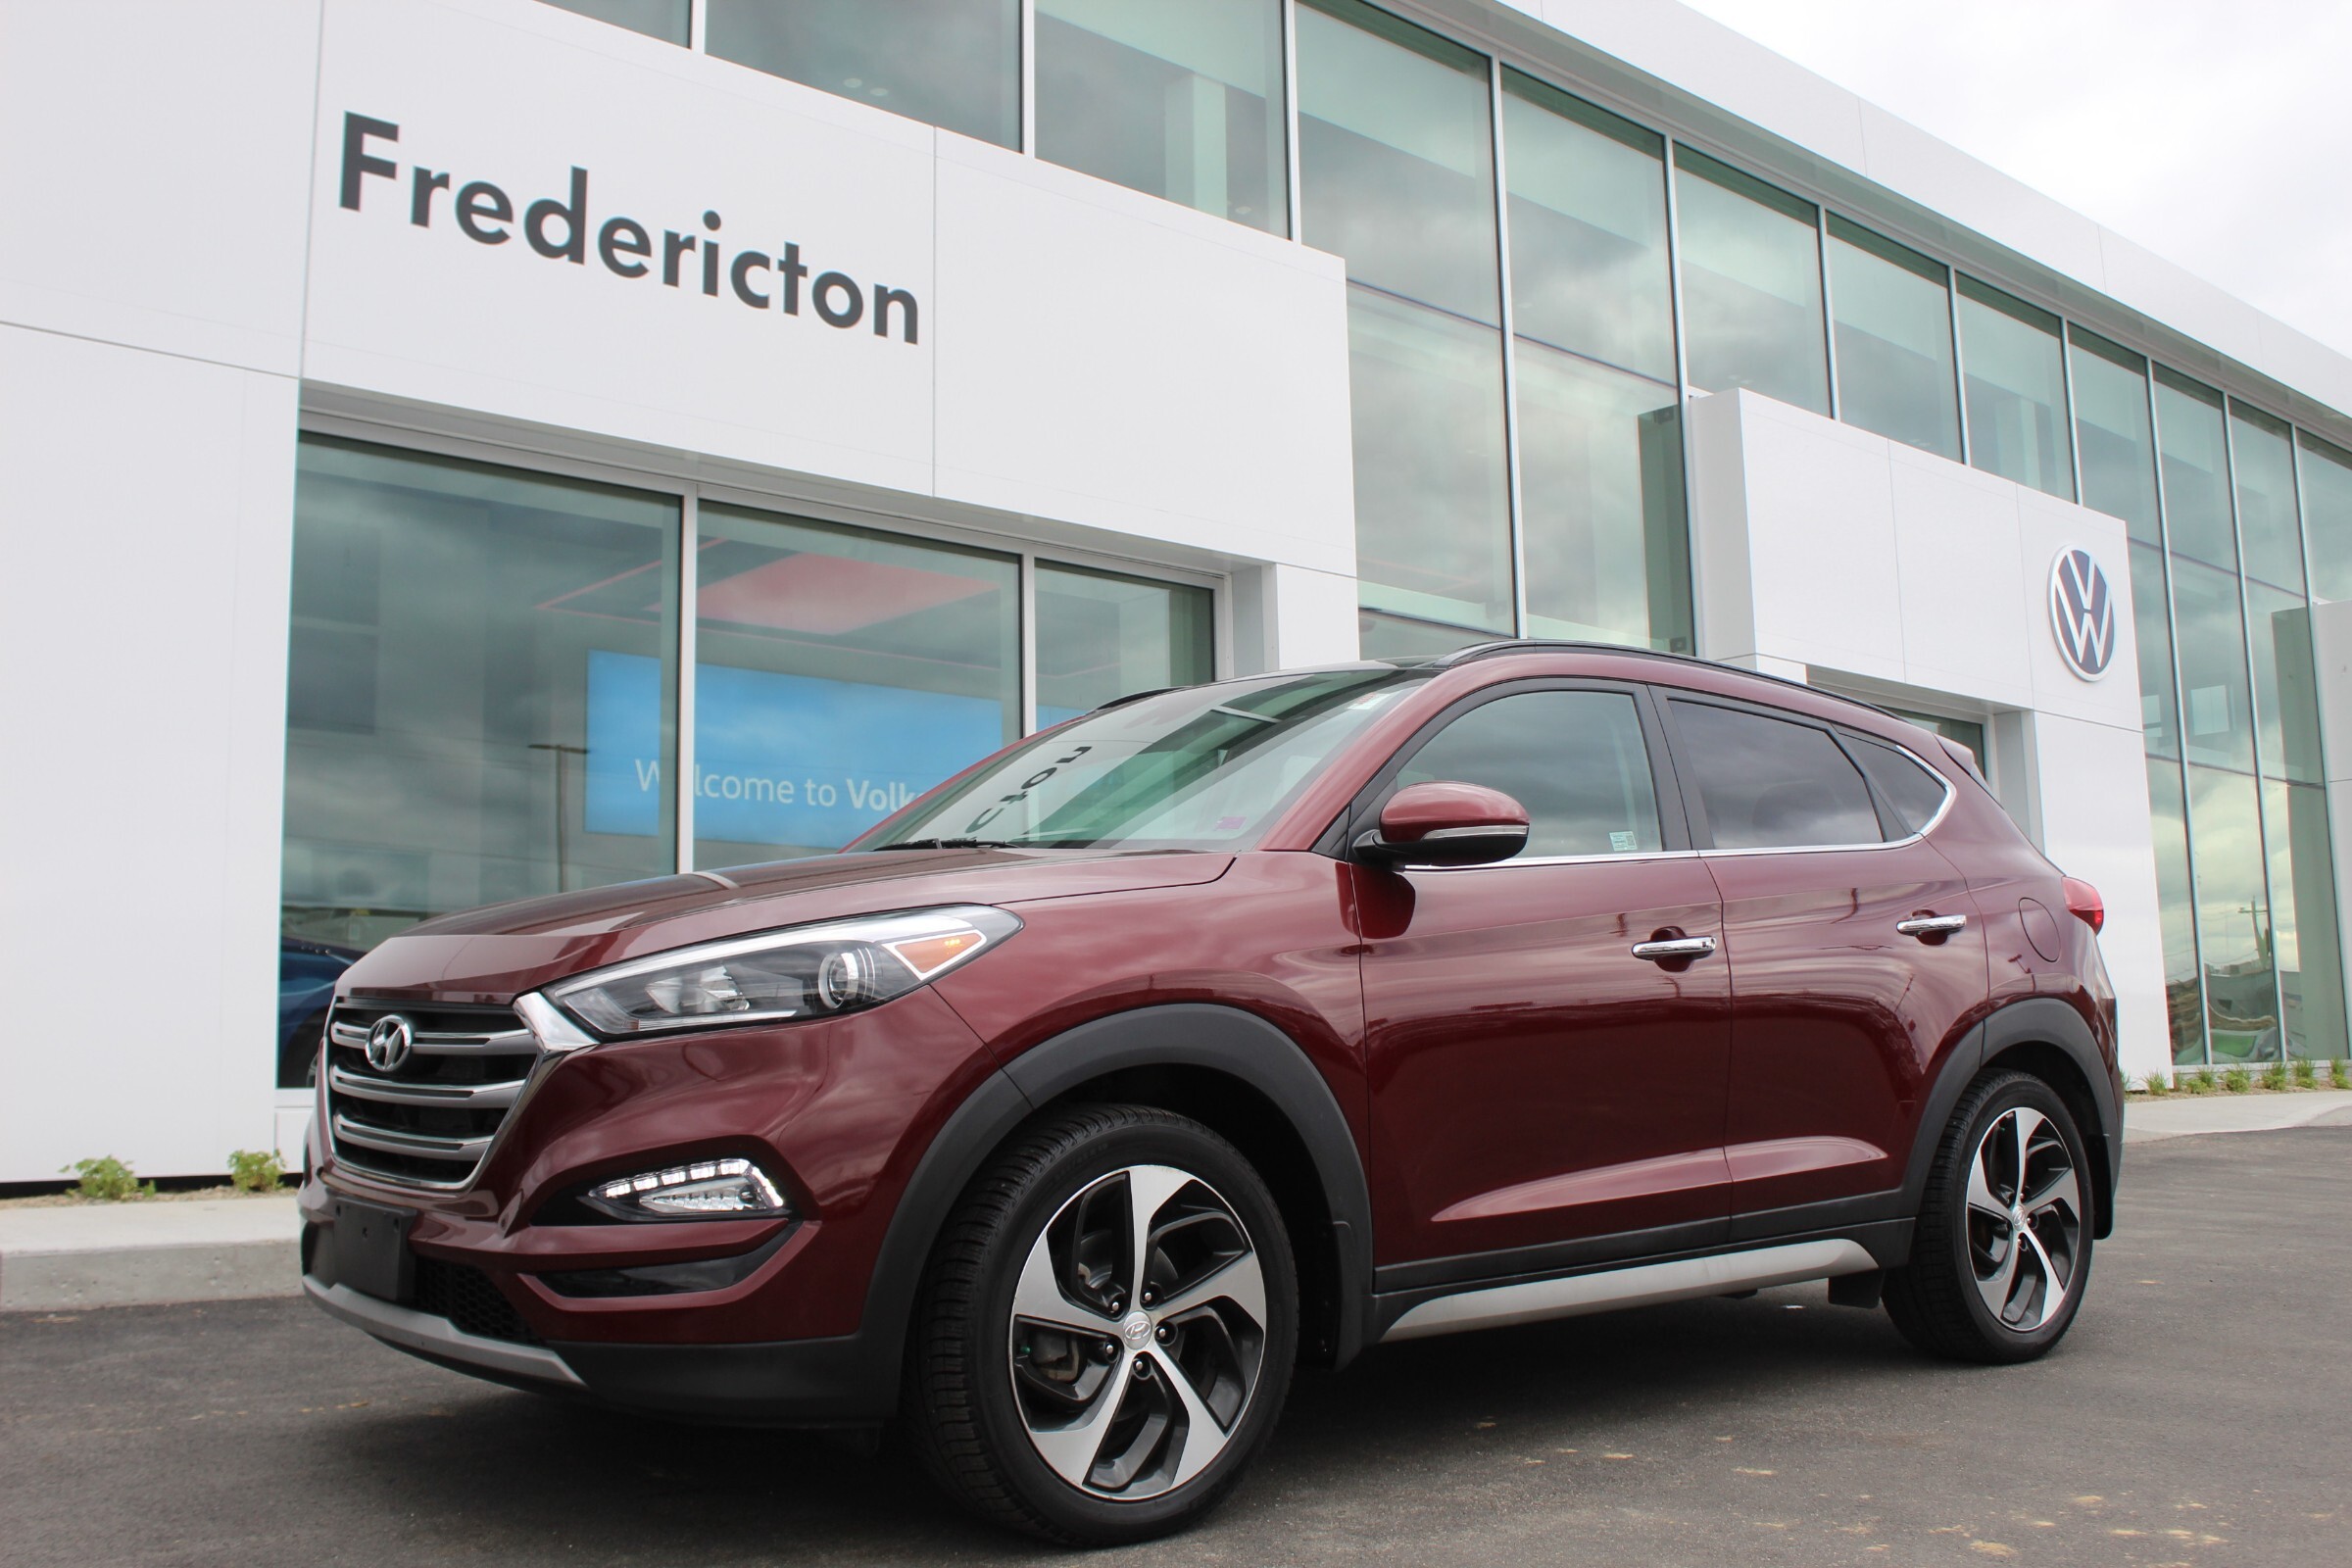 2017 Hyundai Tucson 1.6T AWD | Winter Tires Included